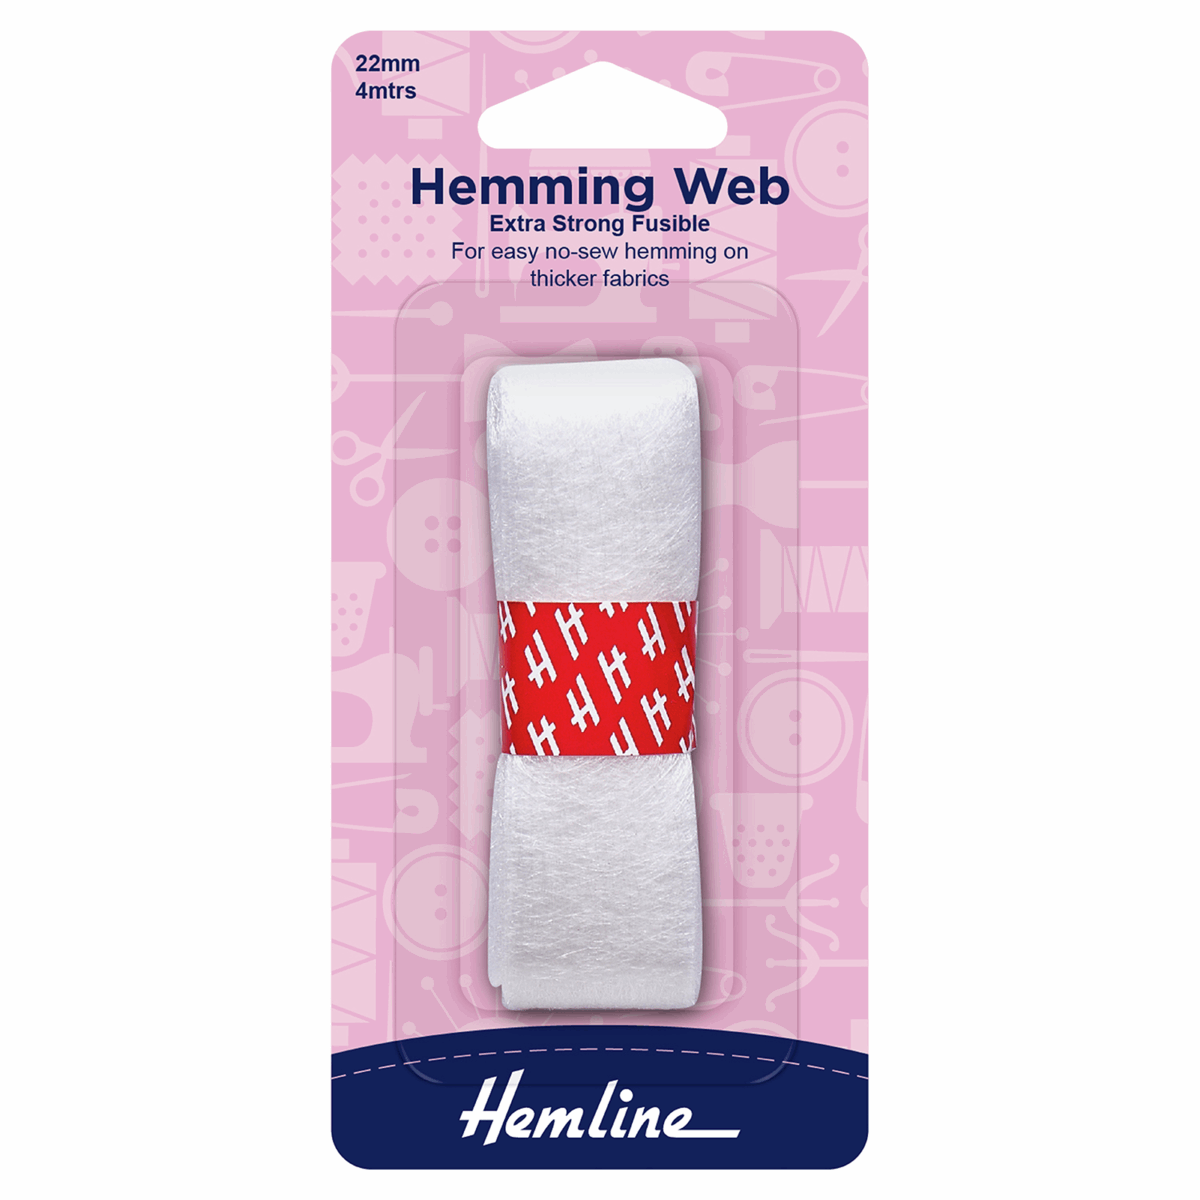 Hemline Extra Strong Fusible Hemming Web - 4m x 22mm